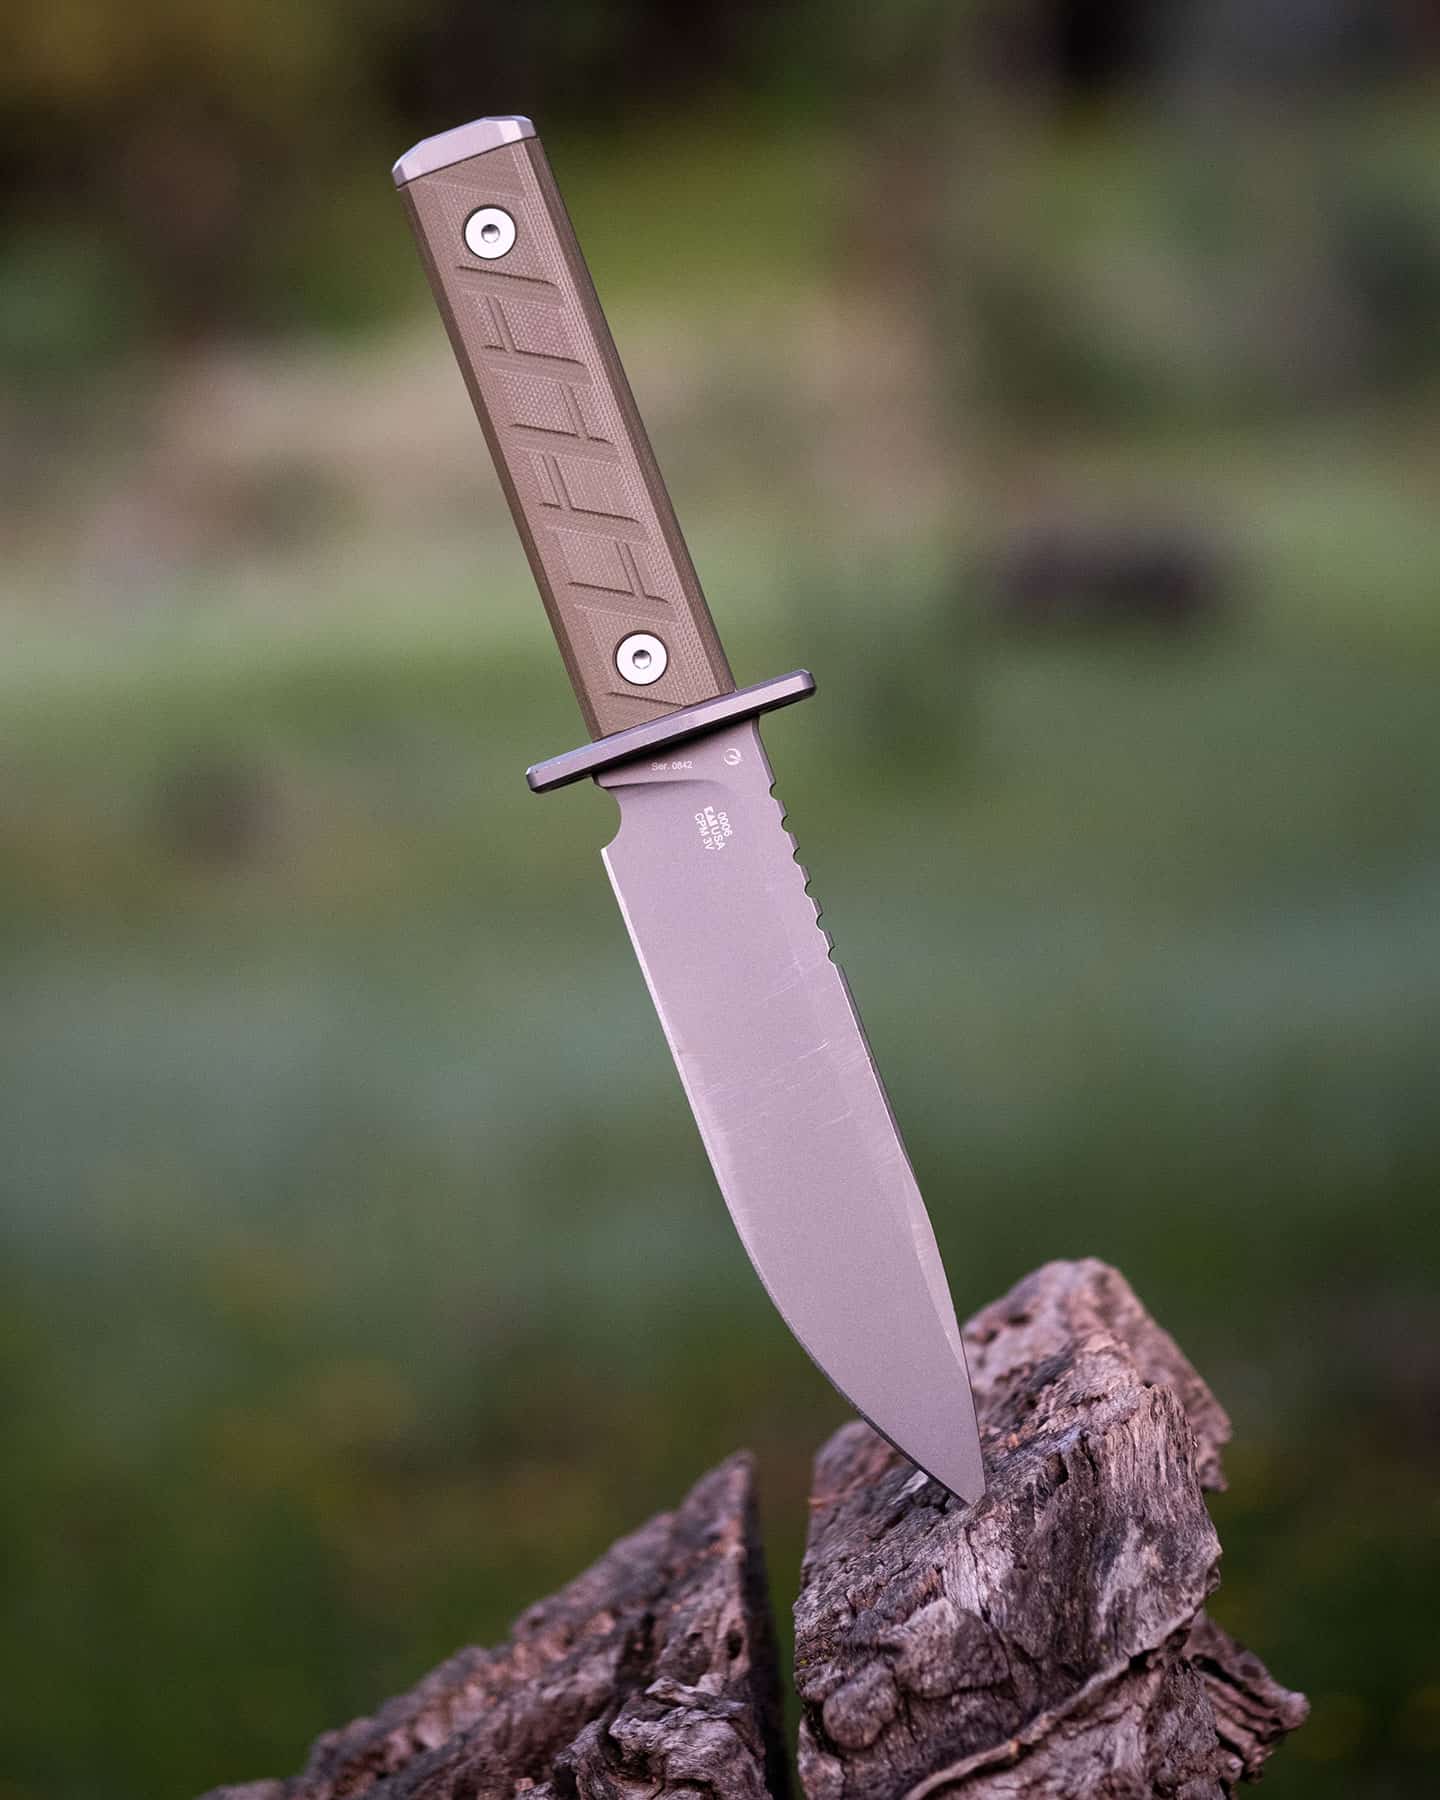 The Zero Tolerance is a practical but expensive survival knife based on the ZT 9 bayonet.